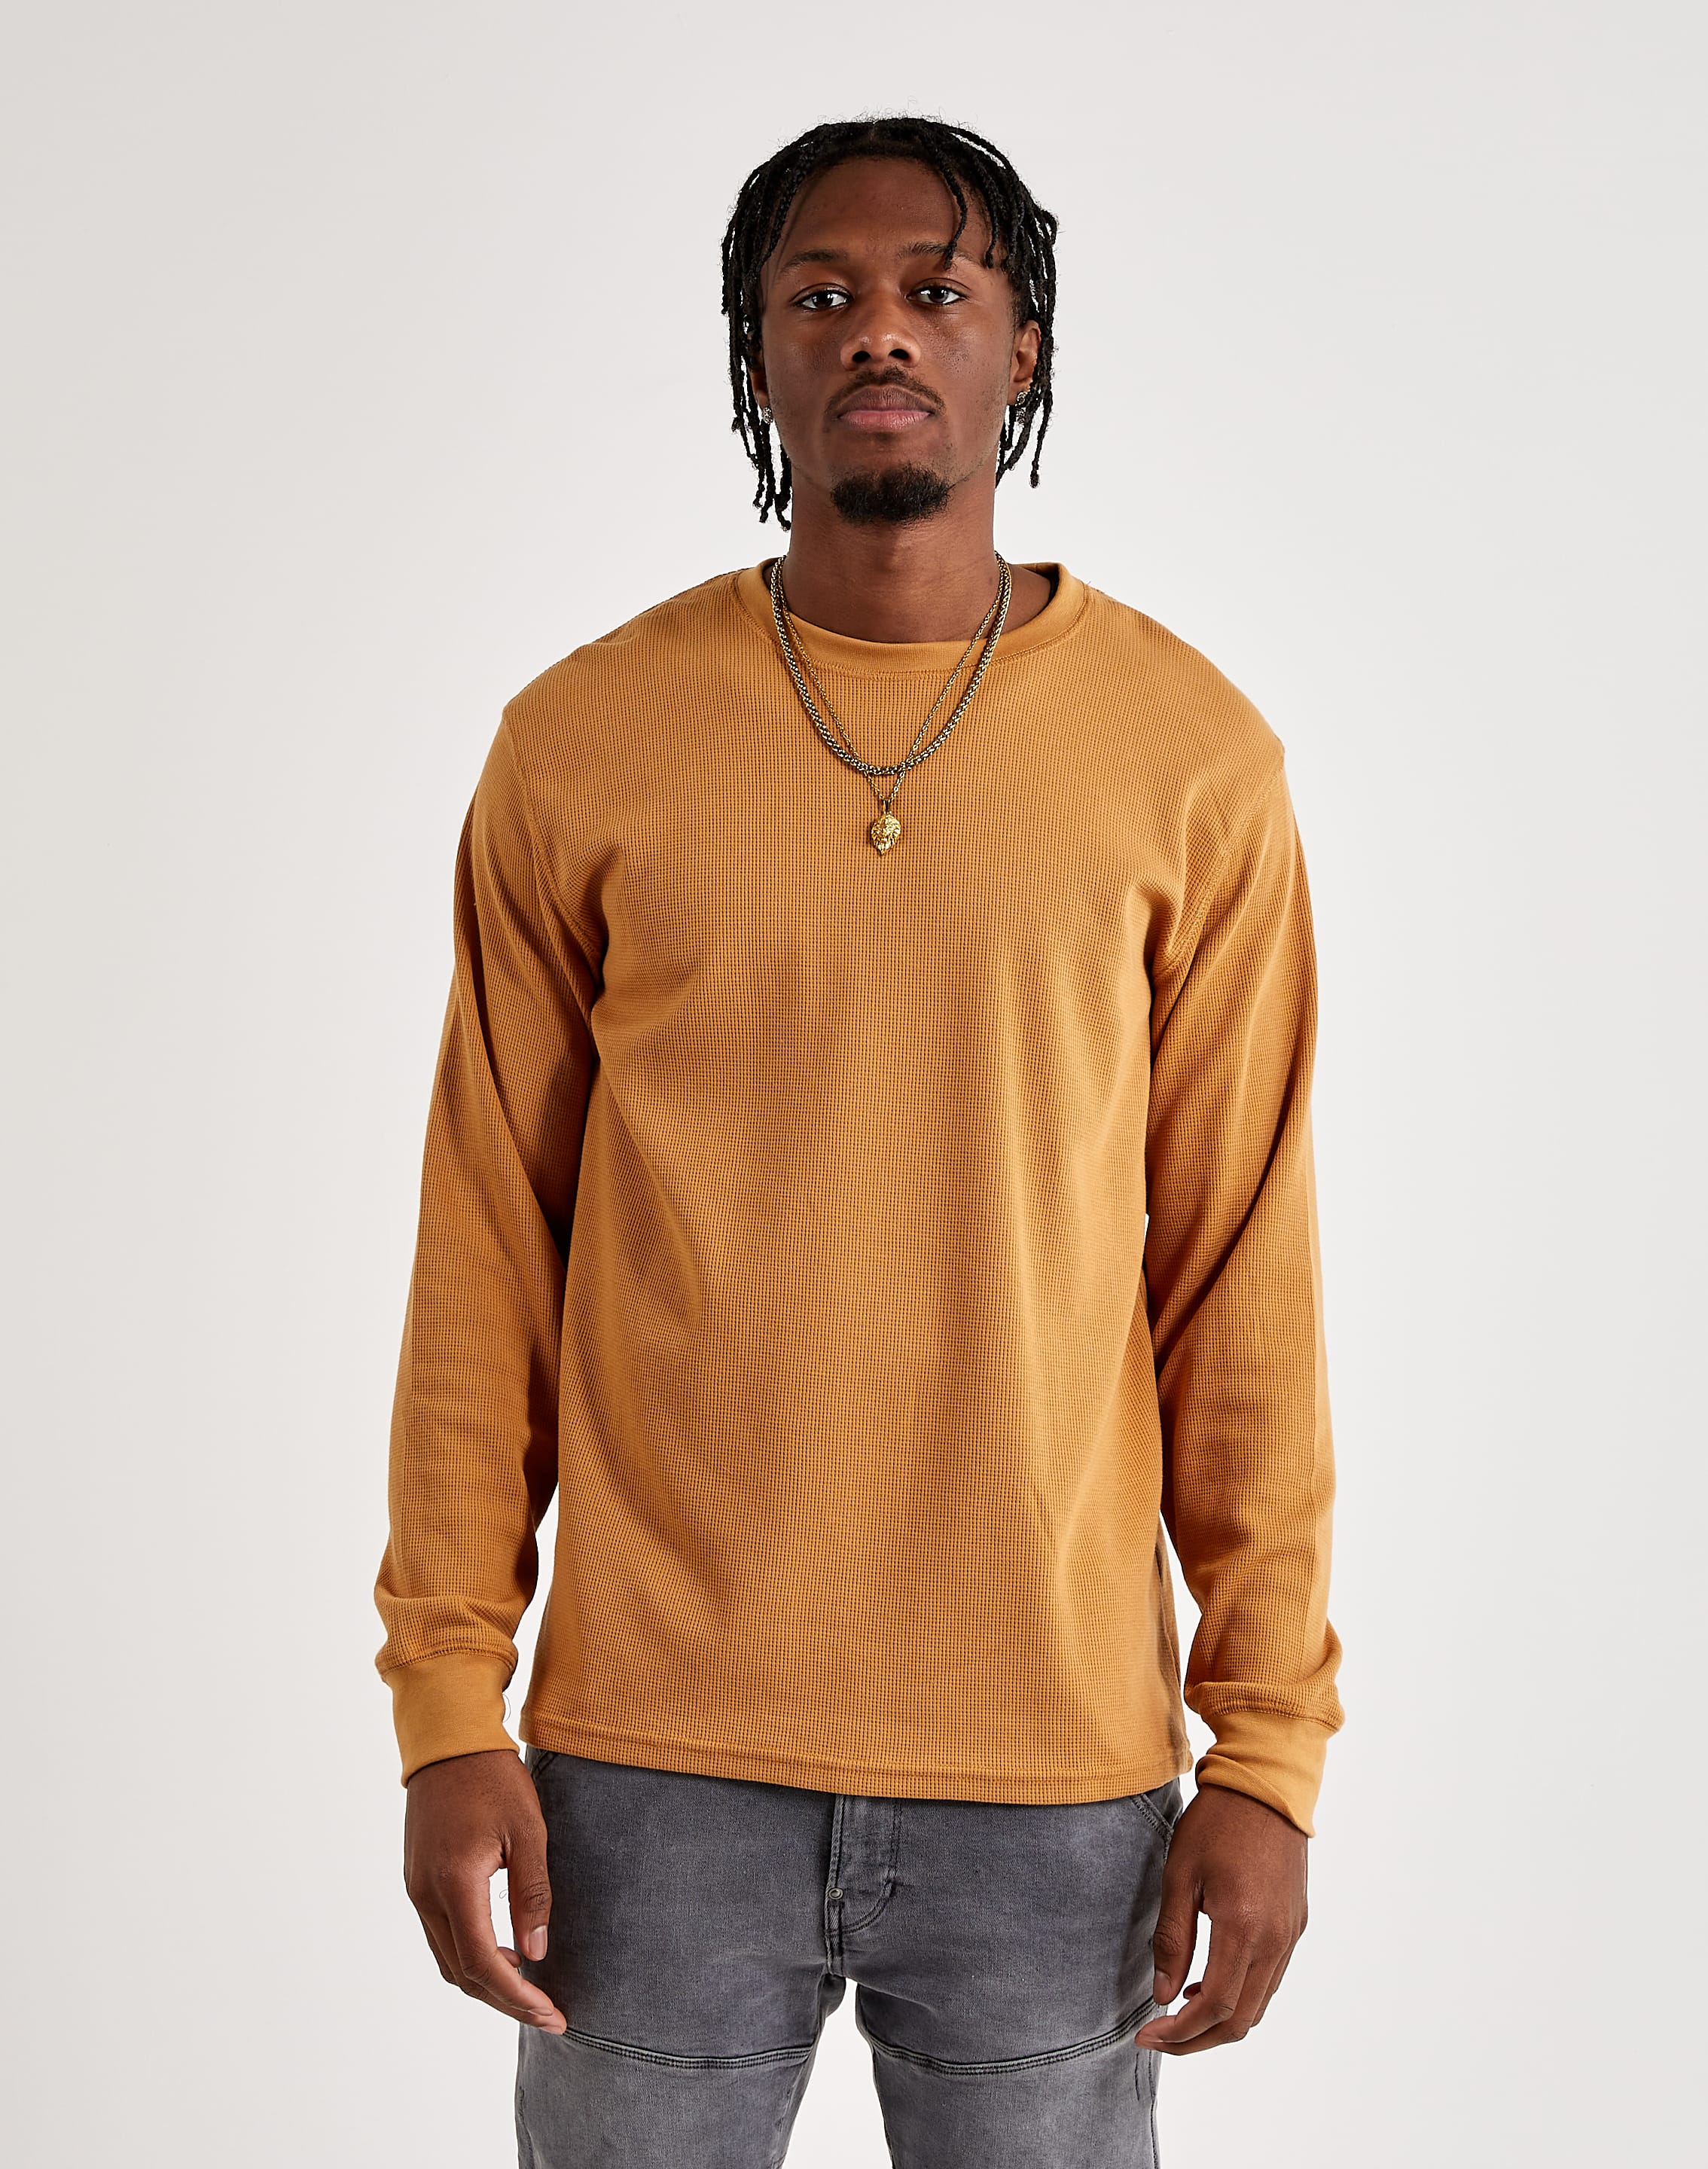 City Lab Classic Thermal Shirt – DTLR